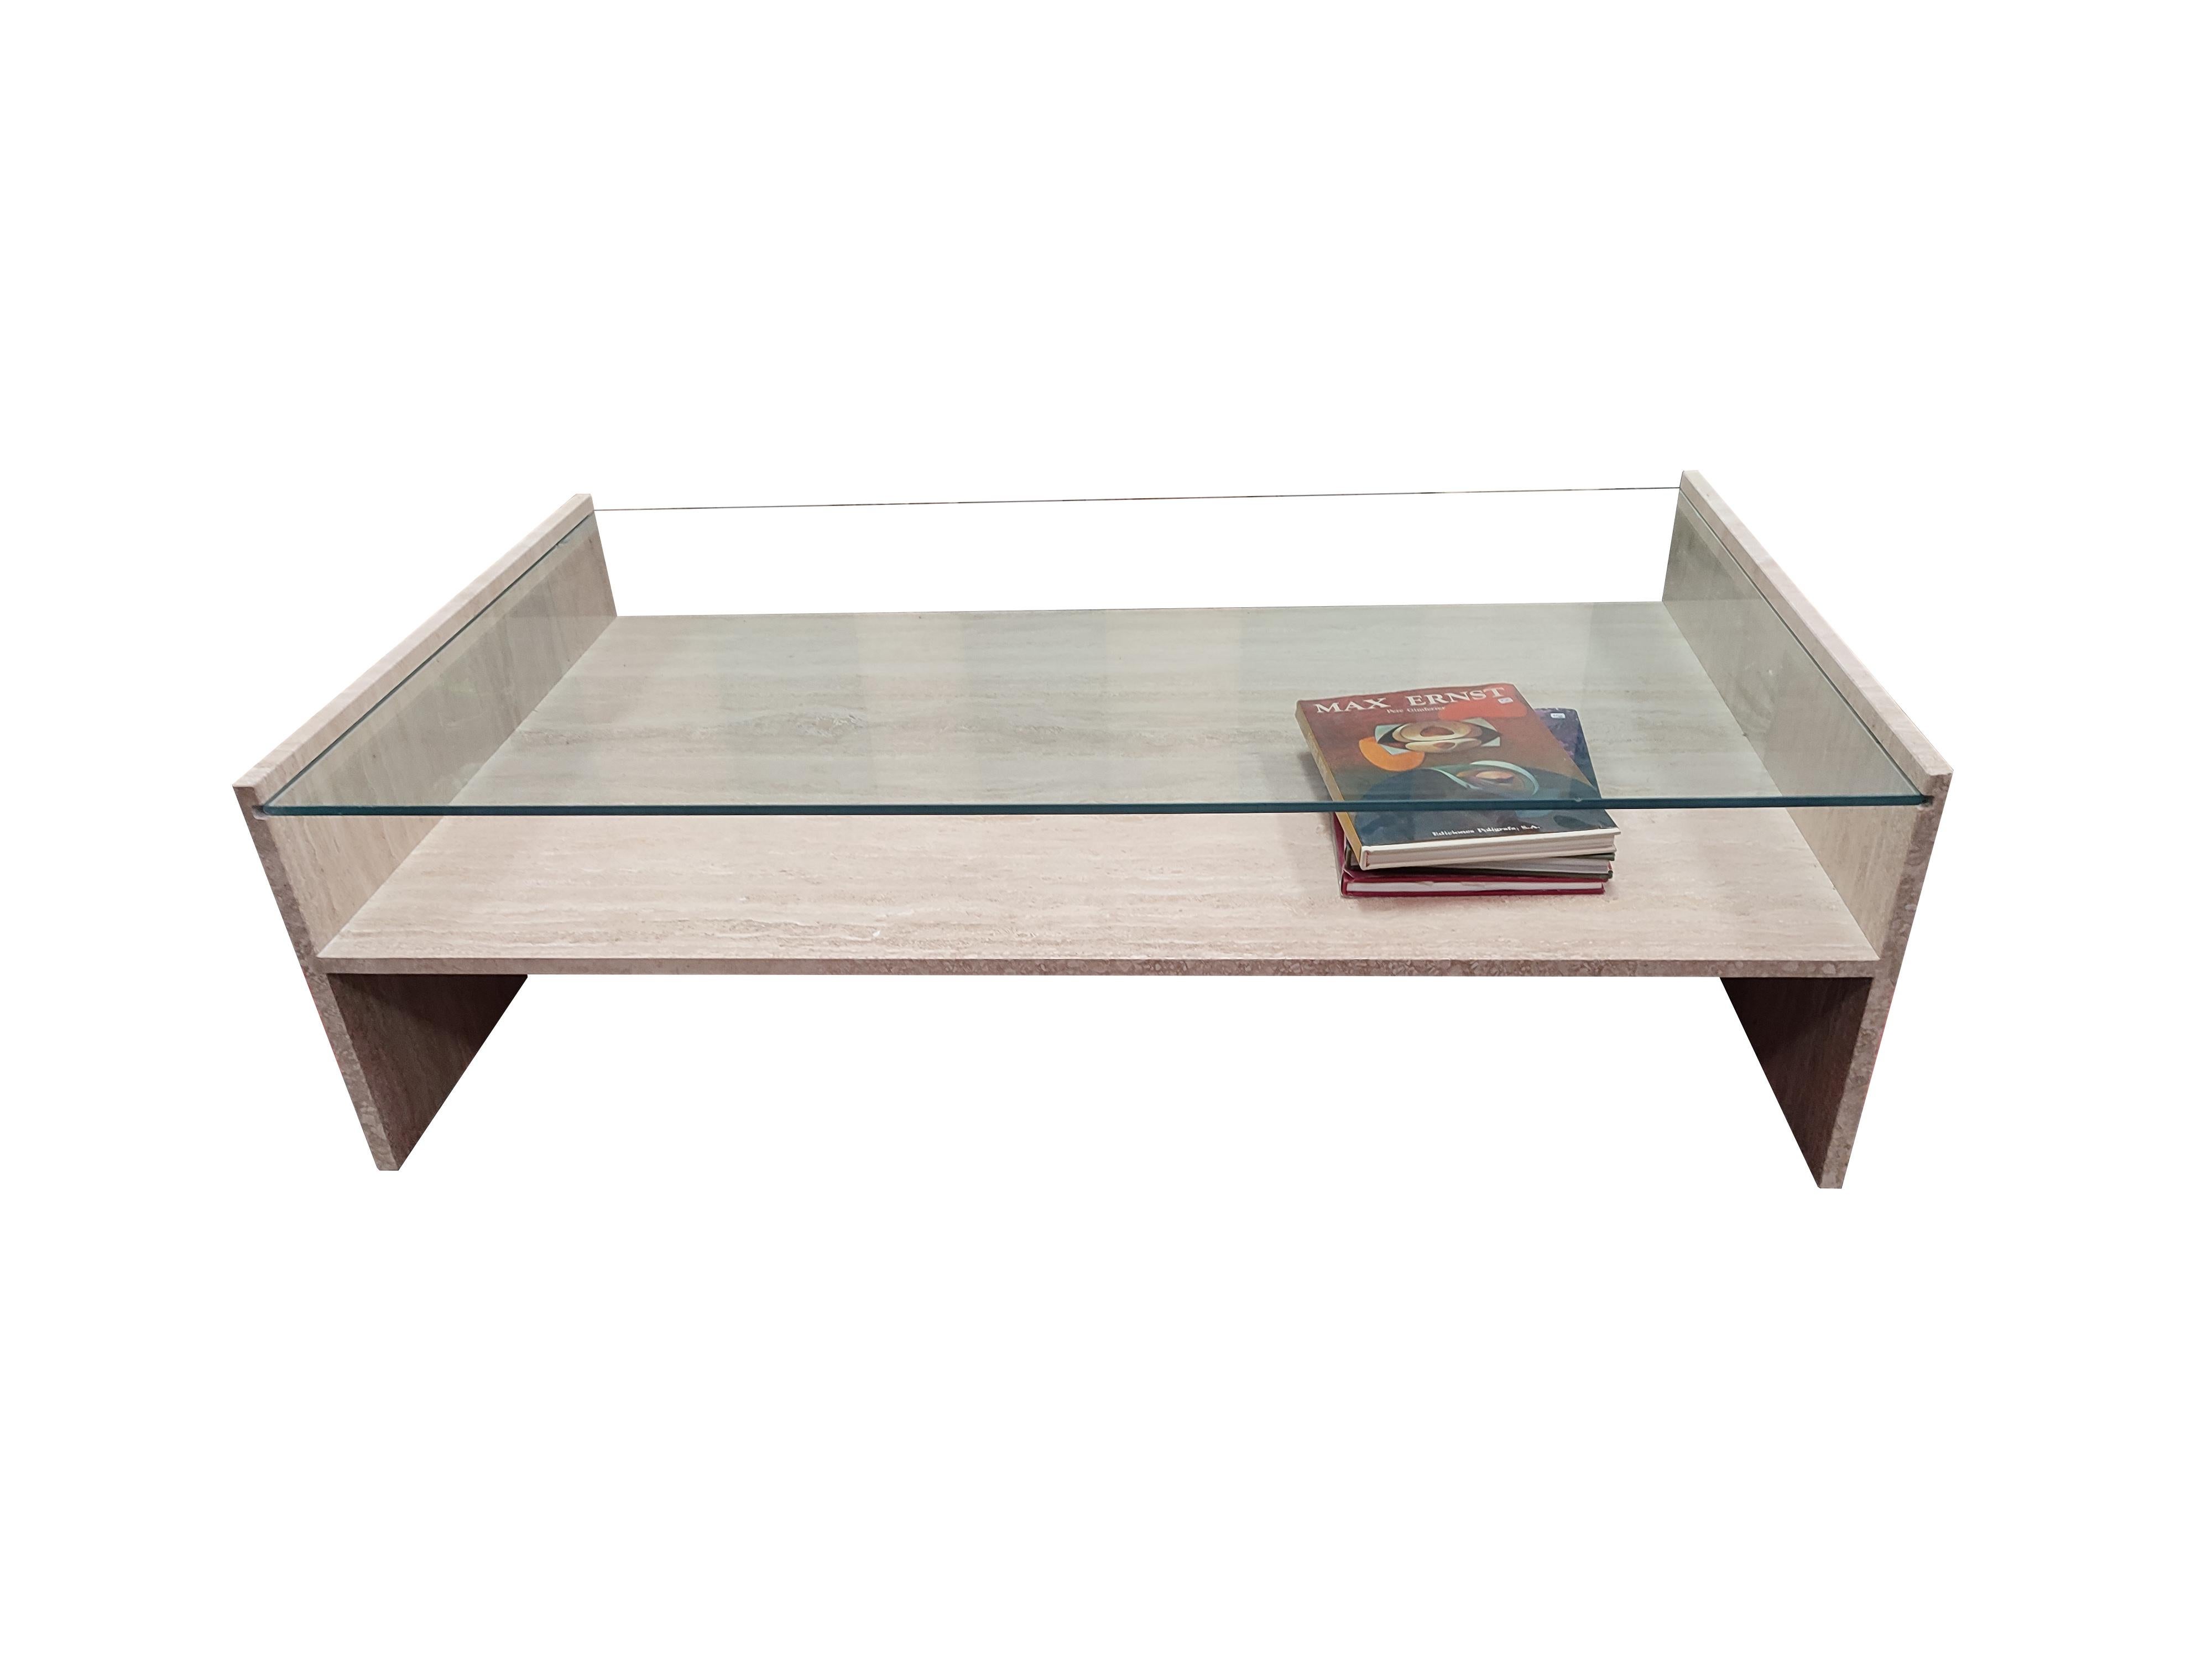 TISSI Midcentury Polished Travertine Marble & Glass Coffee Table Original 80's Spain
The TISSI coffee table is 1980’s original from the beginnings of the Spanish marble design company. The piece has a contemporary design, since despite being an